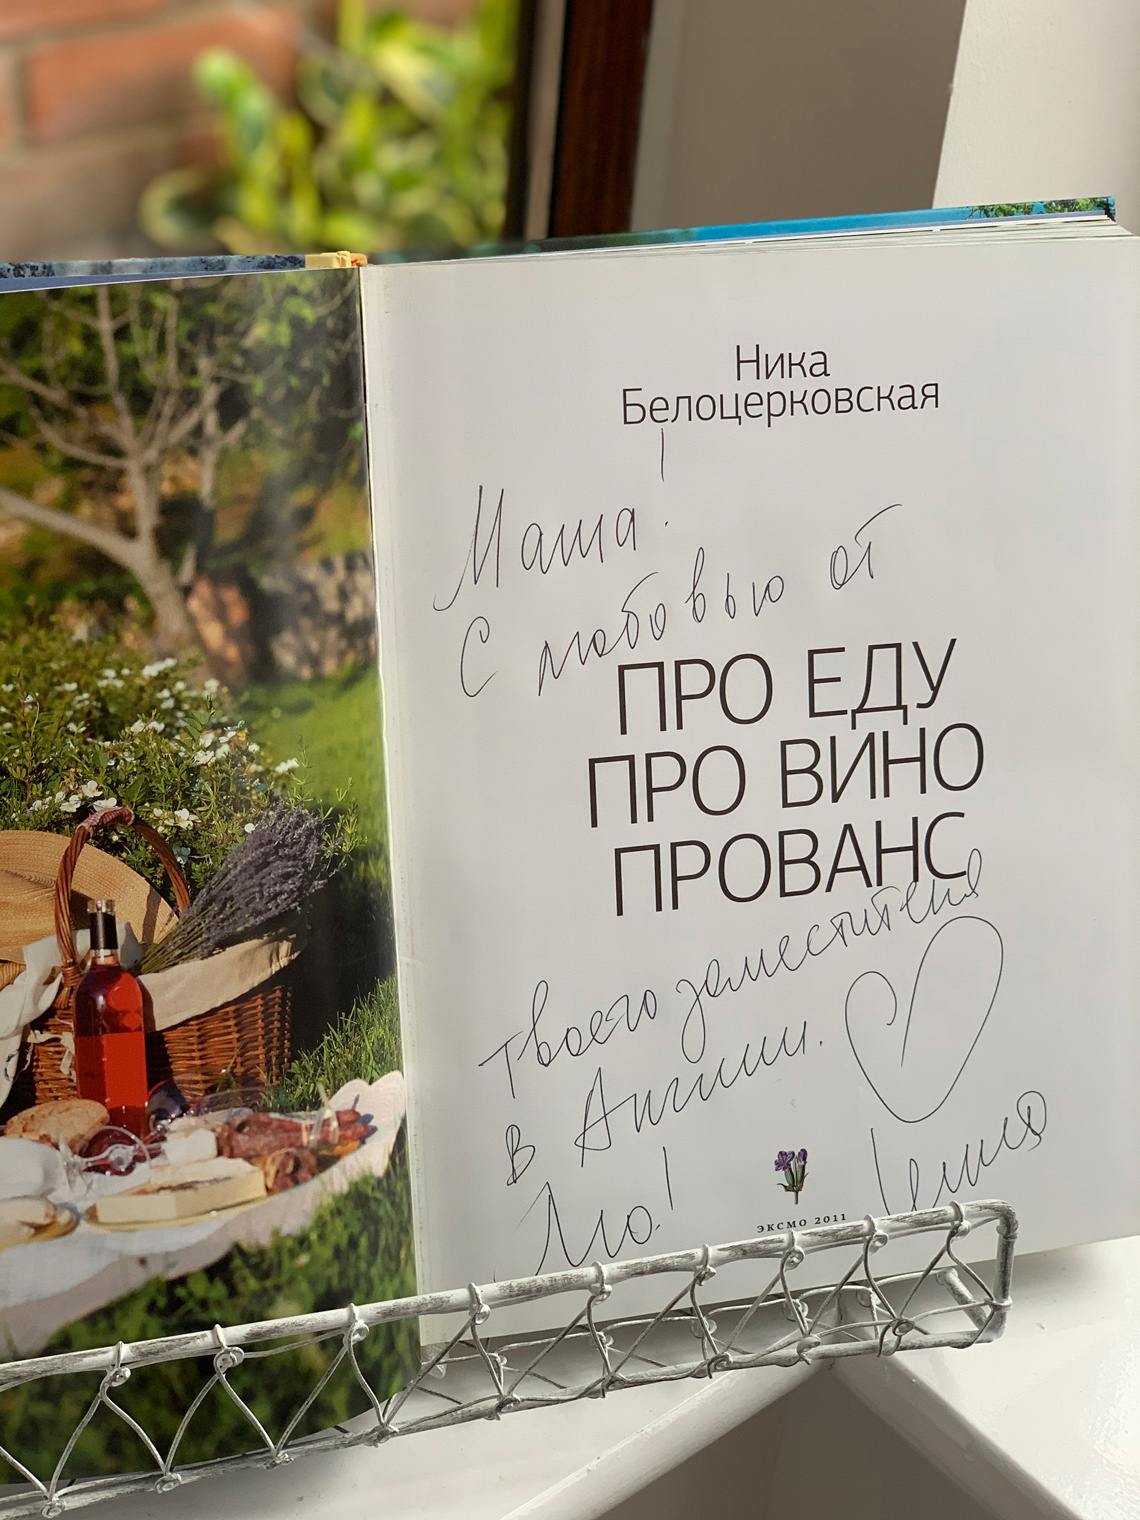 The book by Nika Belotserkovskaya “About Food. About Wine. About Provence” autographed by the author